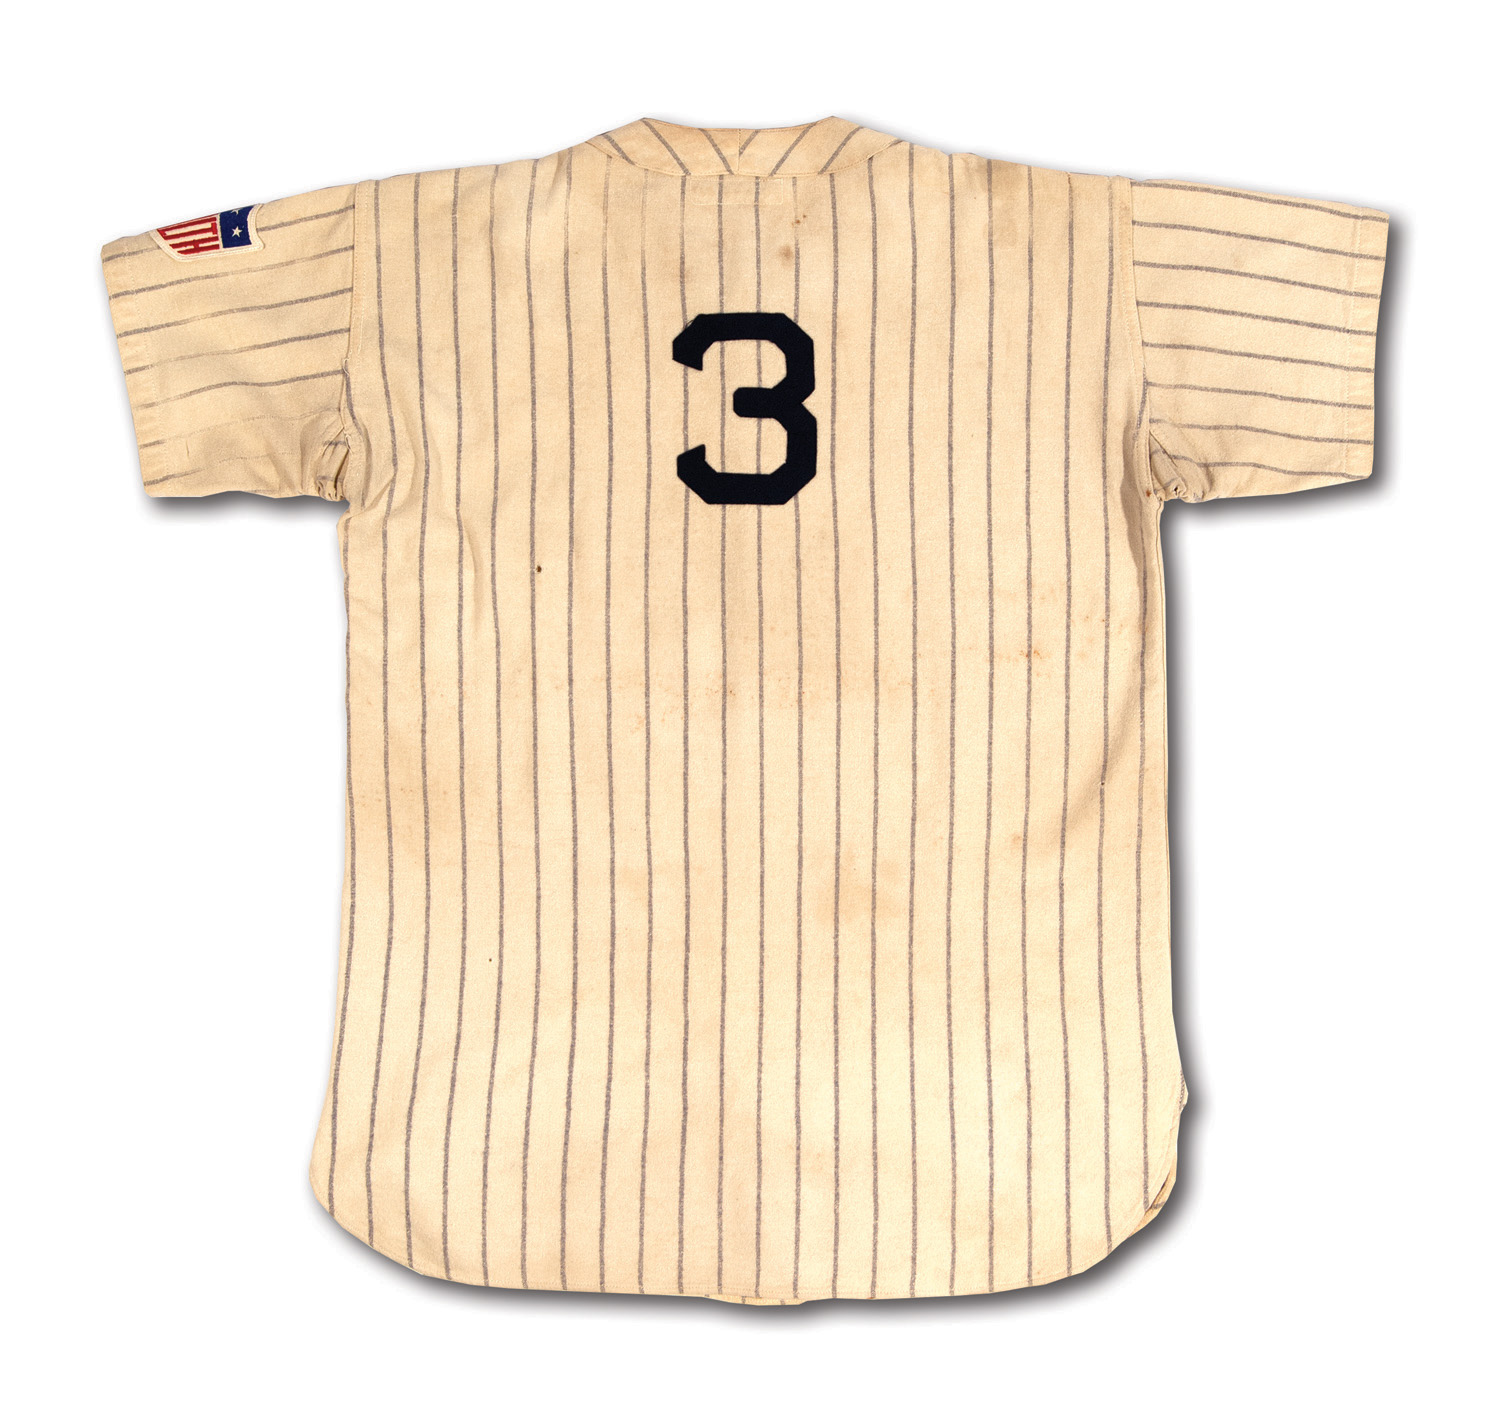 Collectible New York Yankees Jerseys for sale near South Grafton